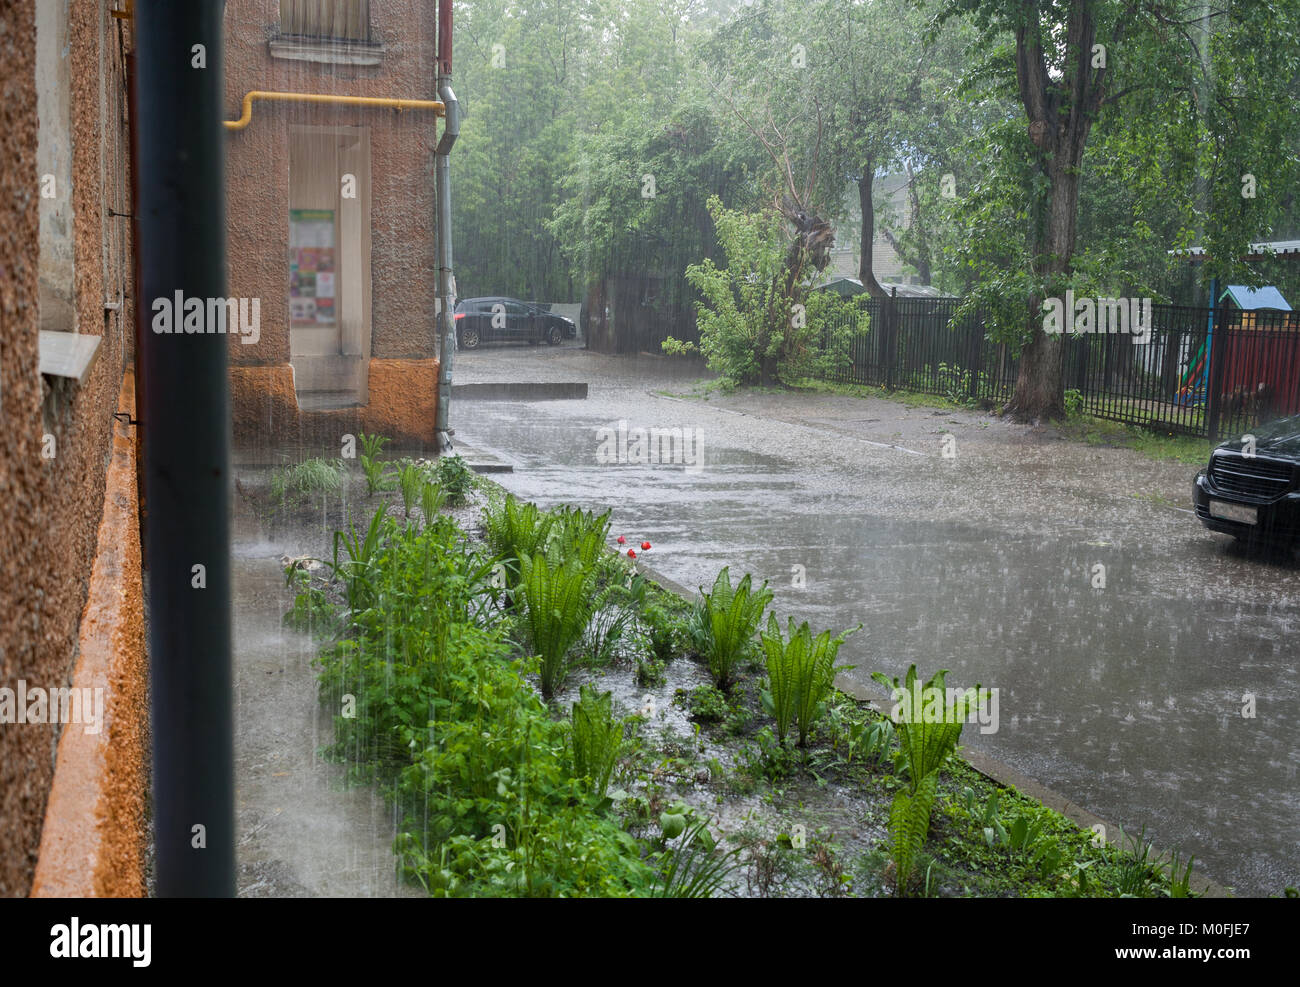 Summer pouring rain in the city. Small courtyard with asphalt way and flowerbed. Stock Photo